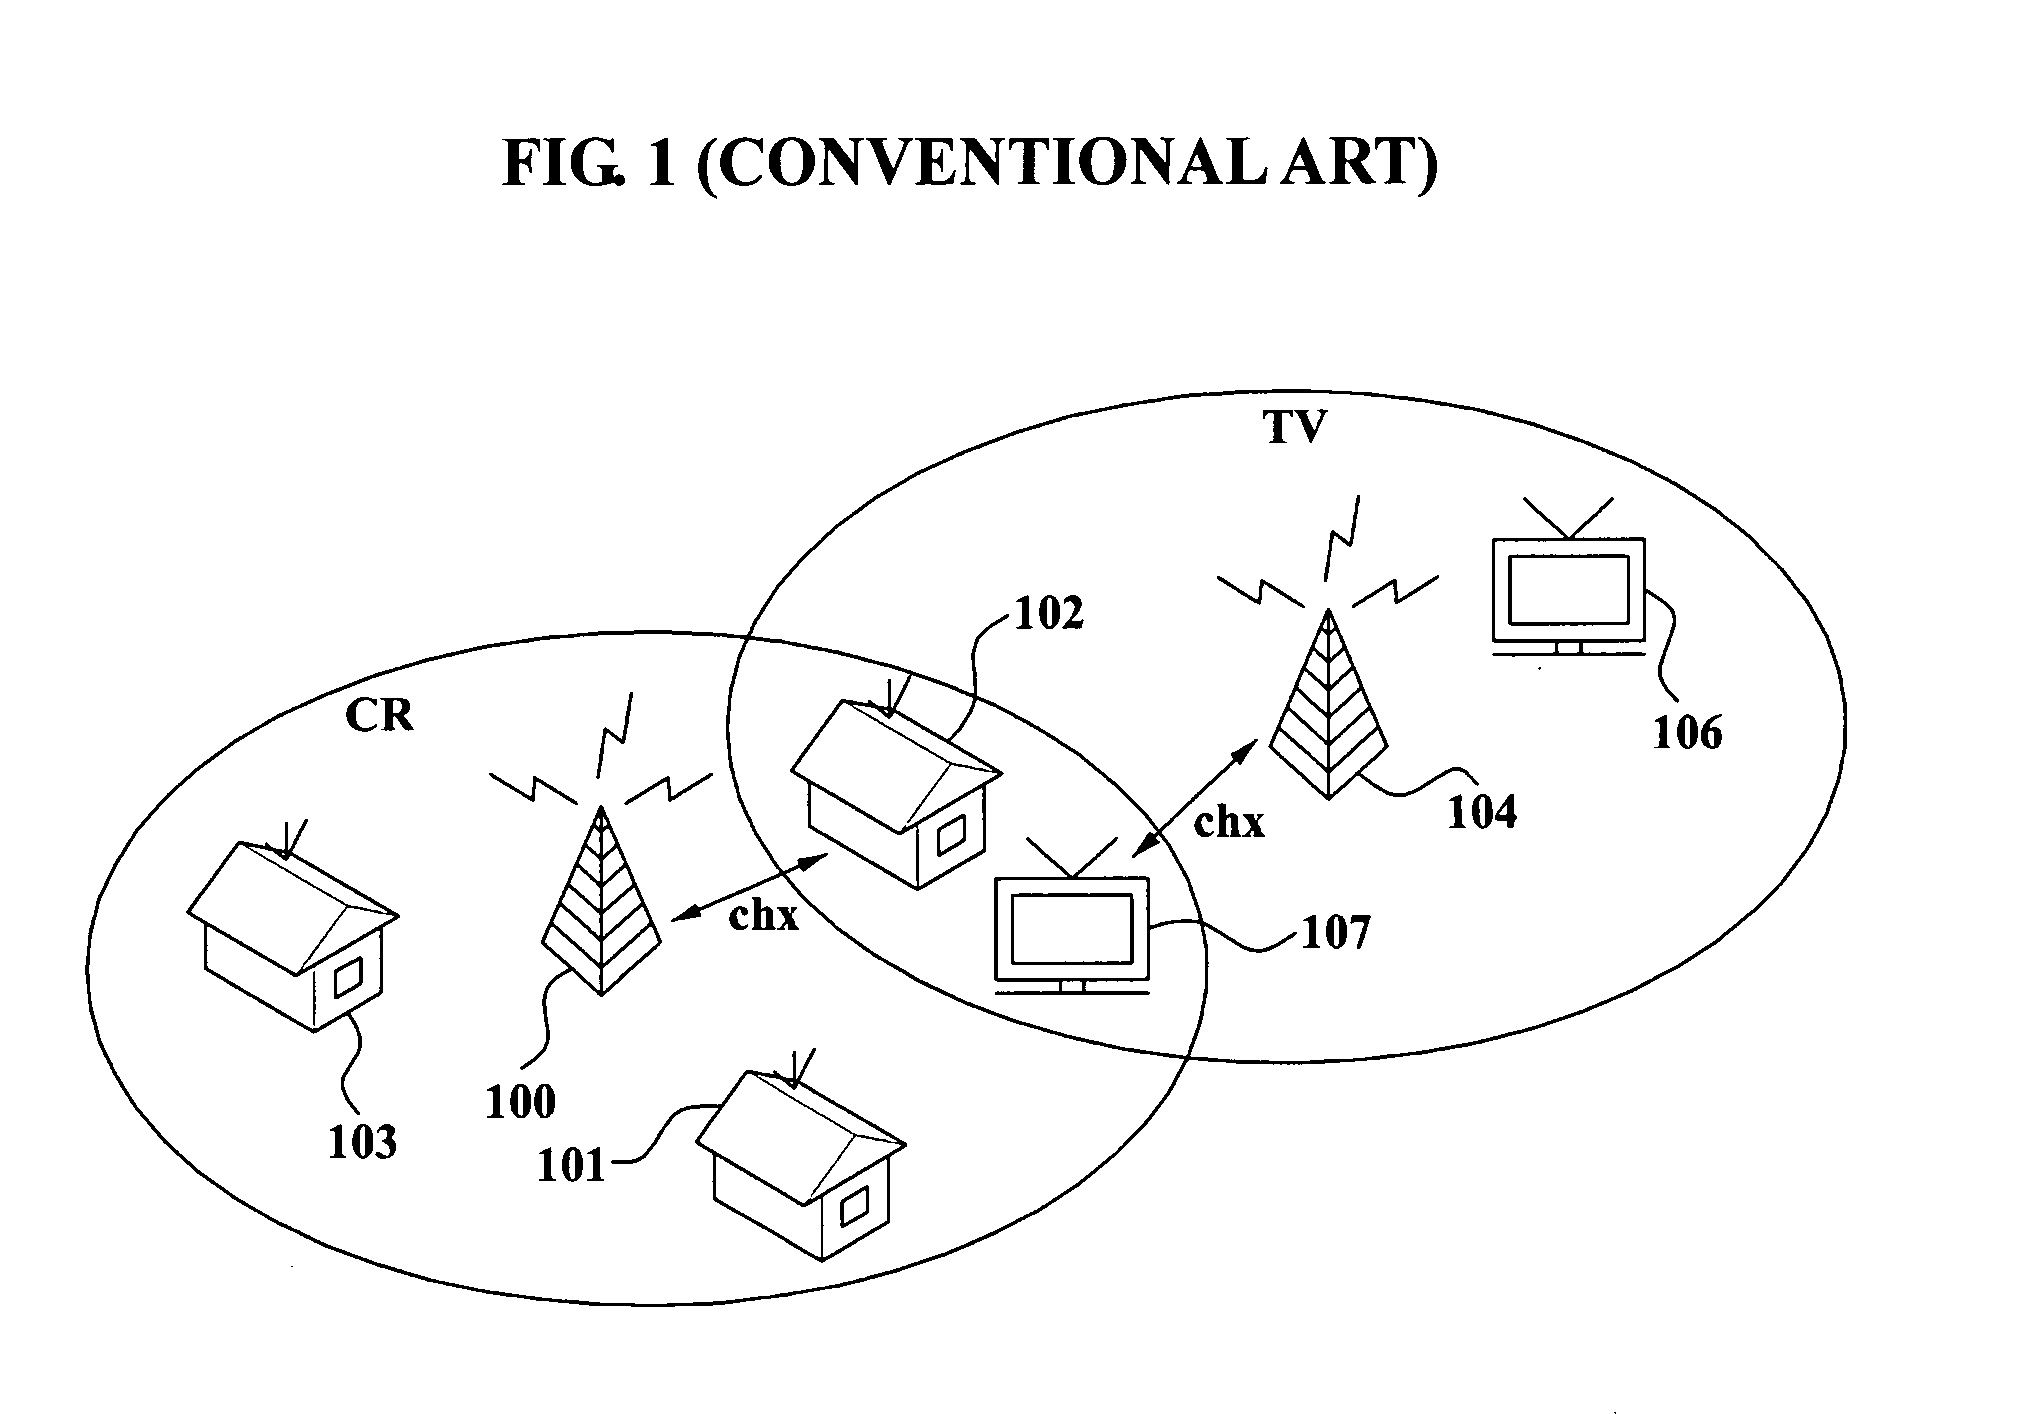 Signalling method of detecting hidden incumbent system in cognitive radio environment and channel fractioning method used to enable the method